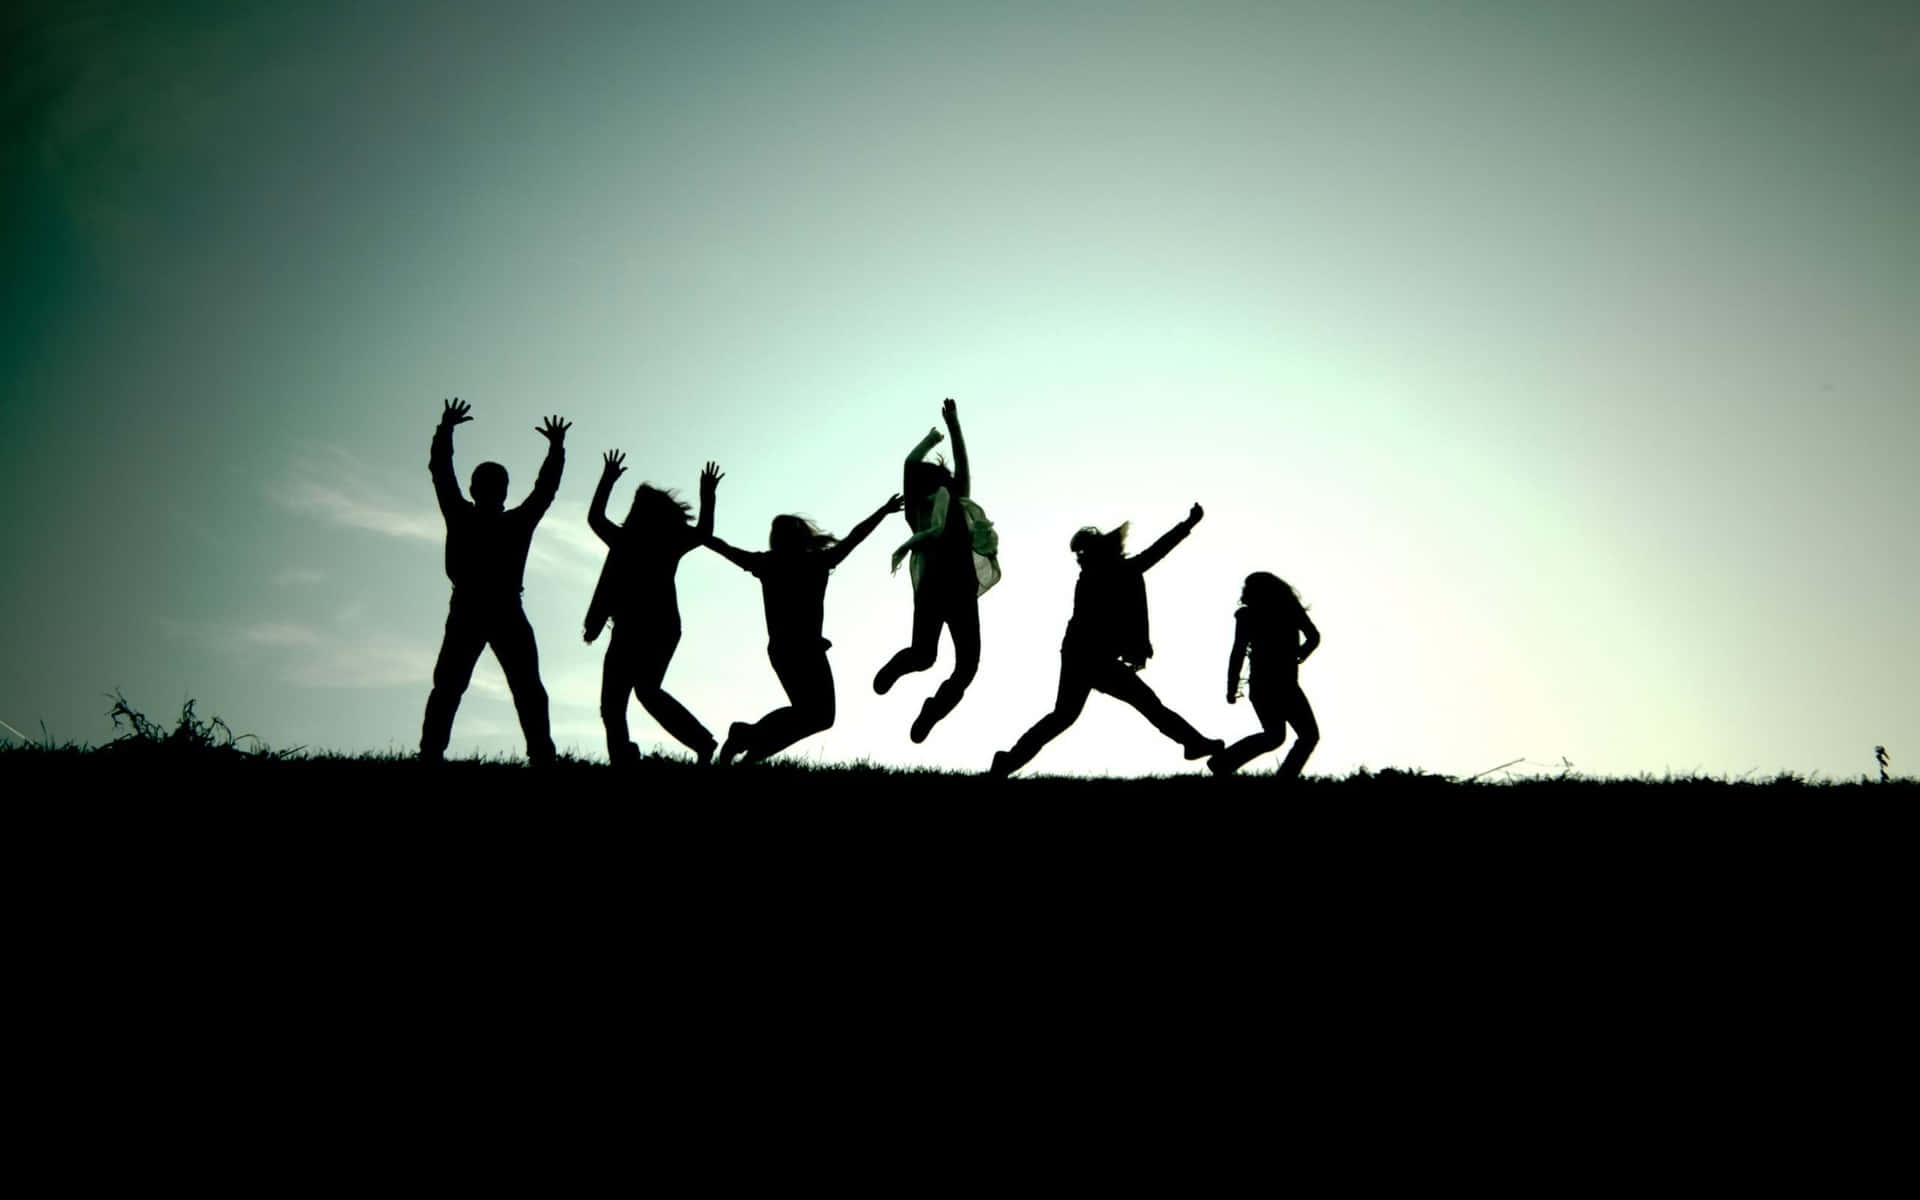 Silhouette Of People Jumping On A Hill